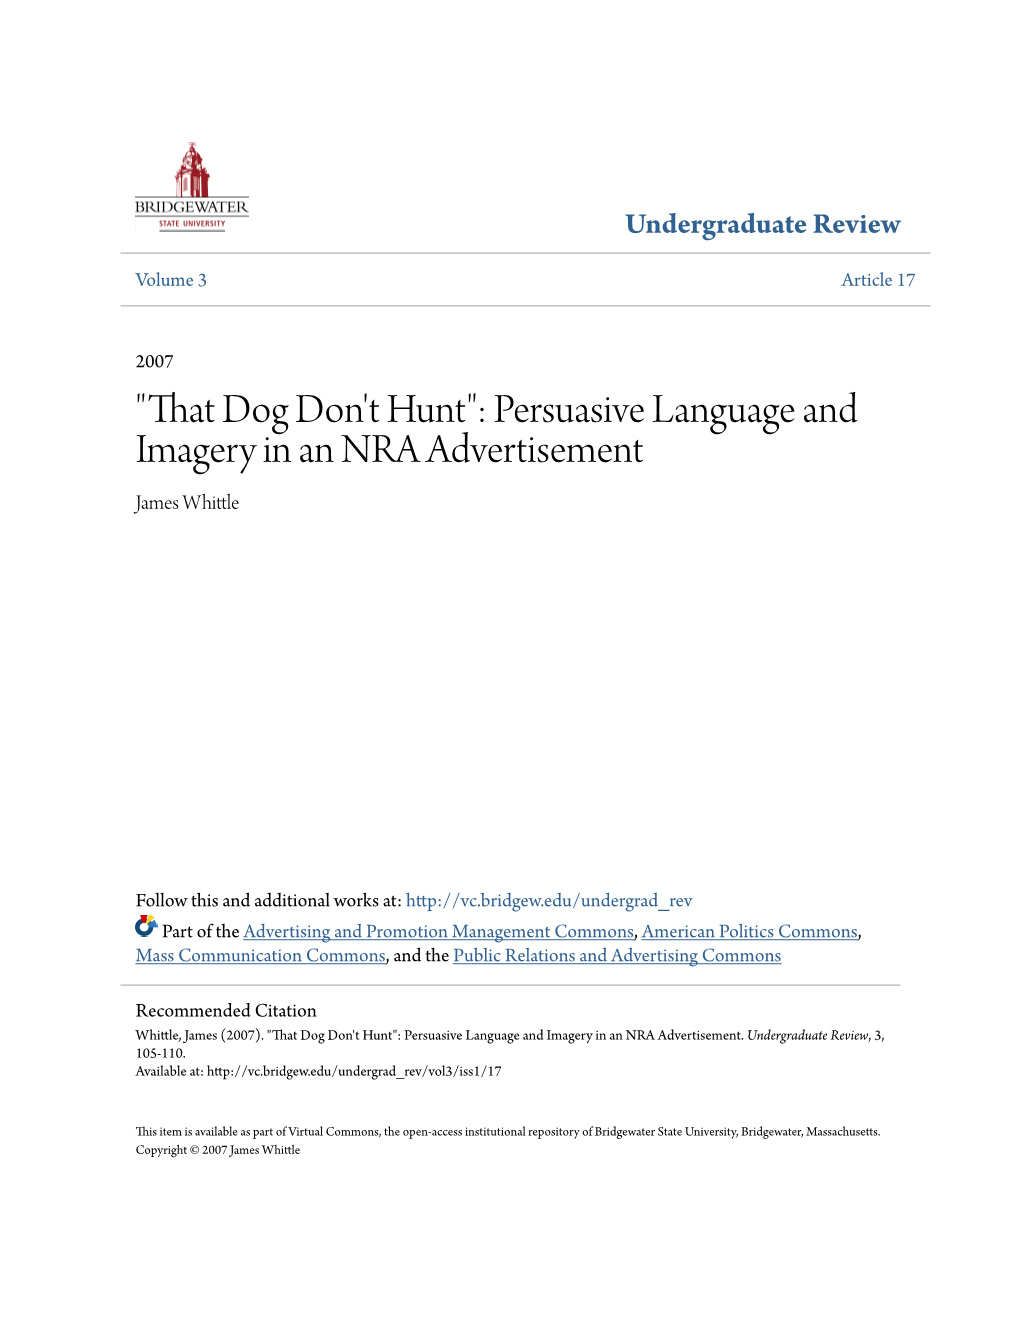 That Dog Don't Hunt": Persuasive Language and Imagery in an NRA Advertisement James Whittle